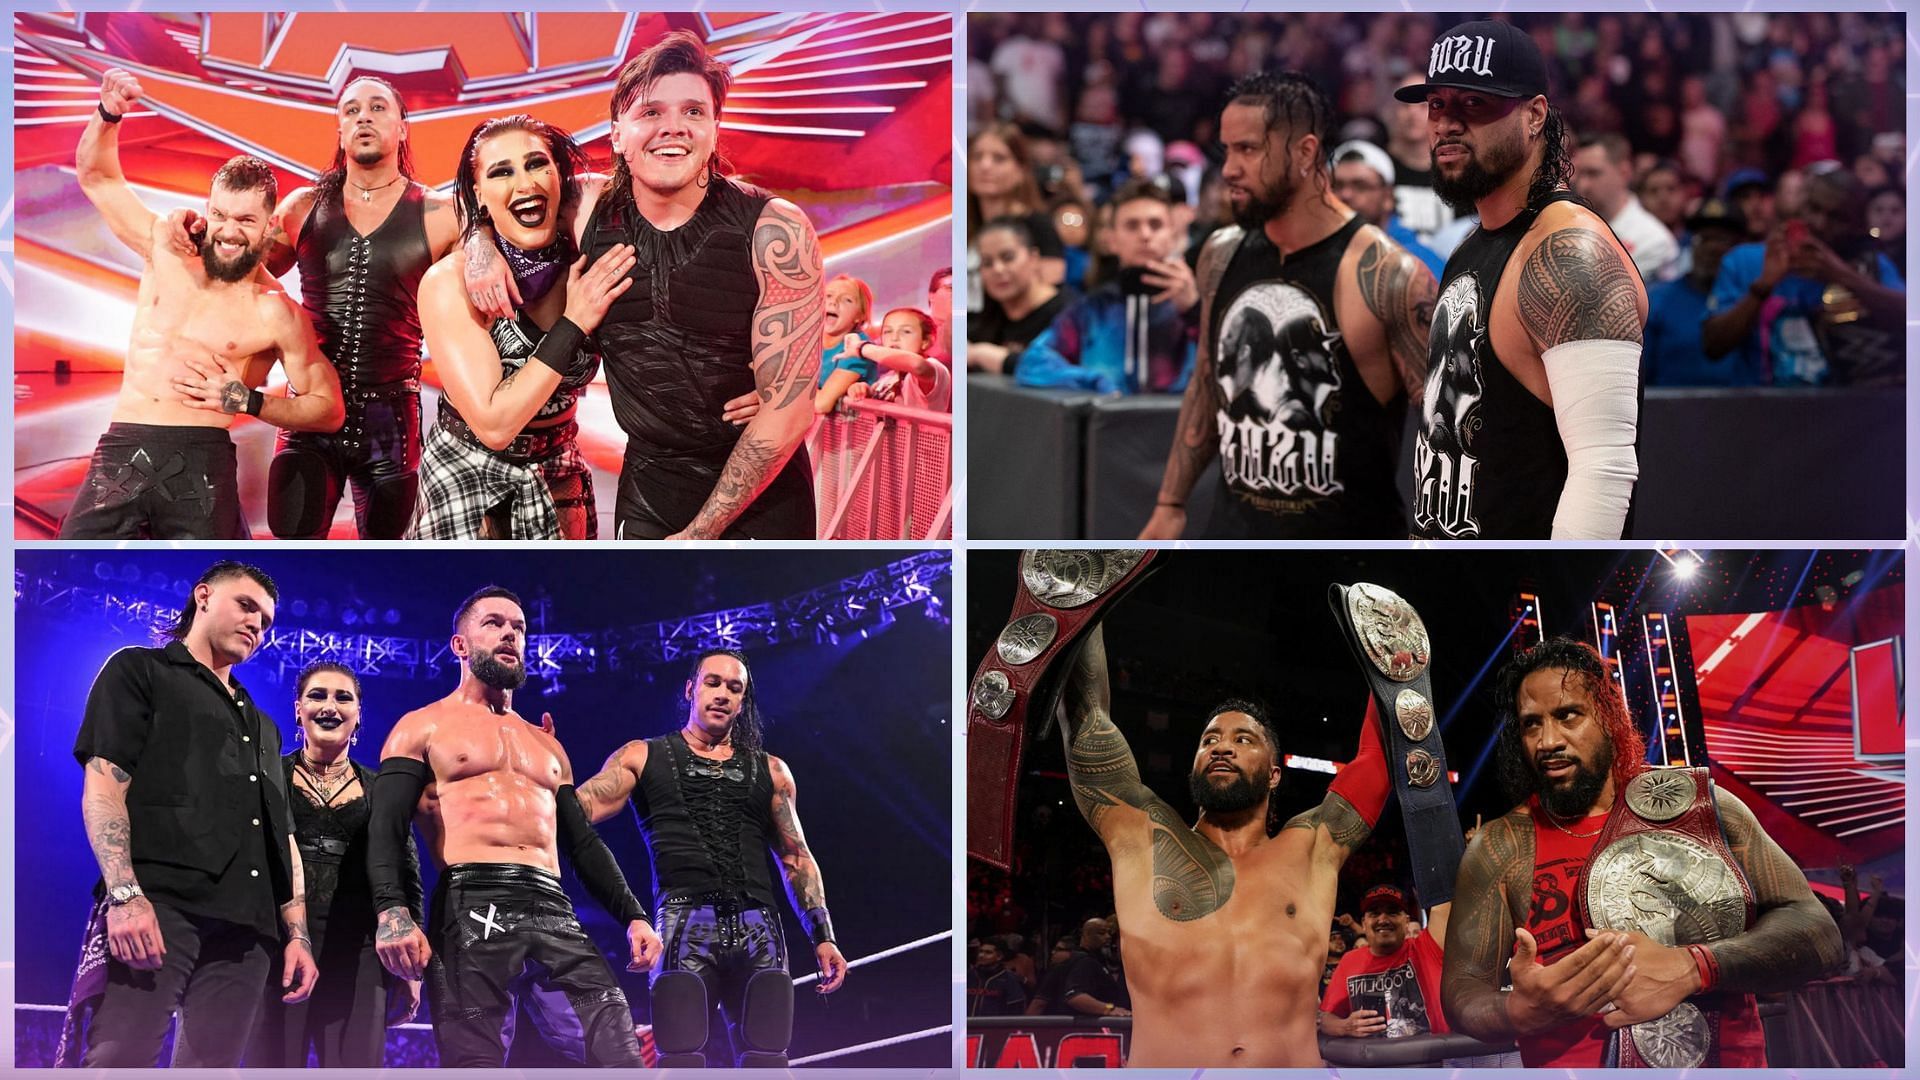 Judgment Day (left) and The Usos (right).